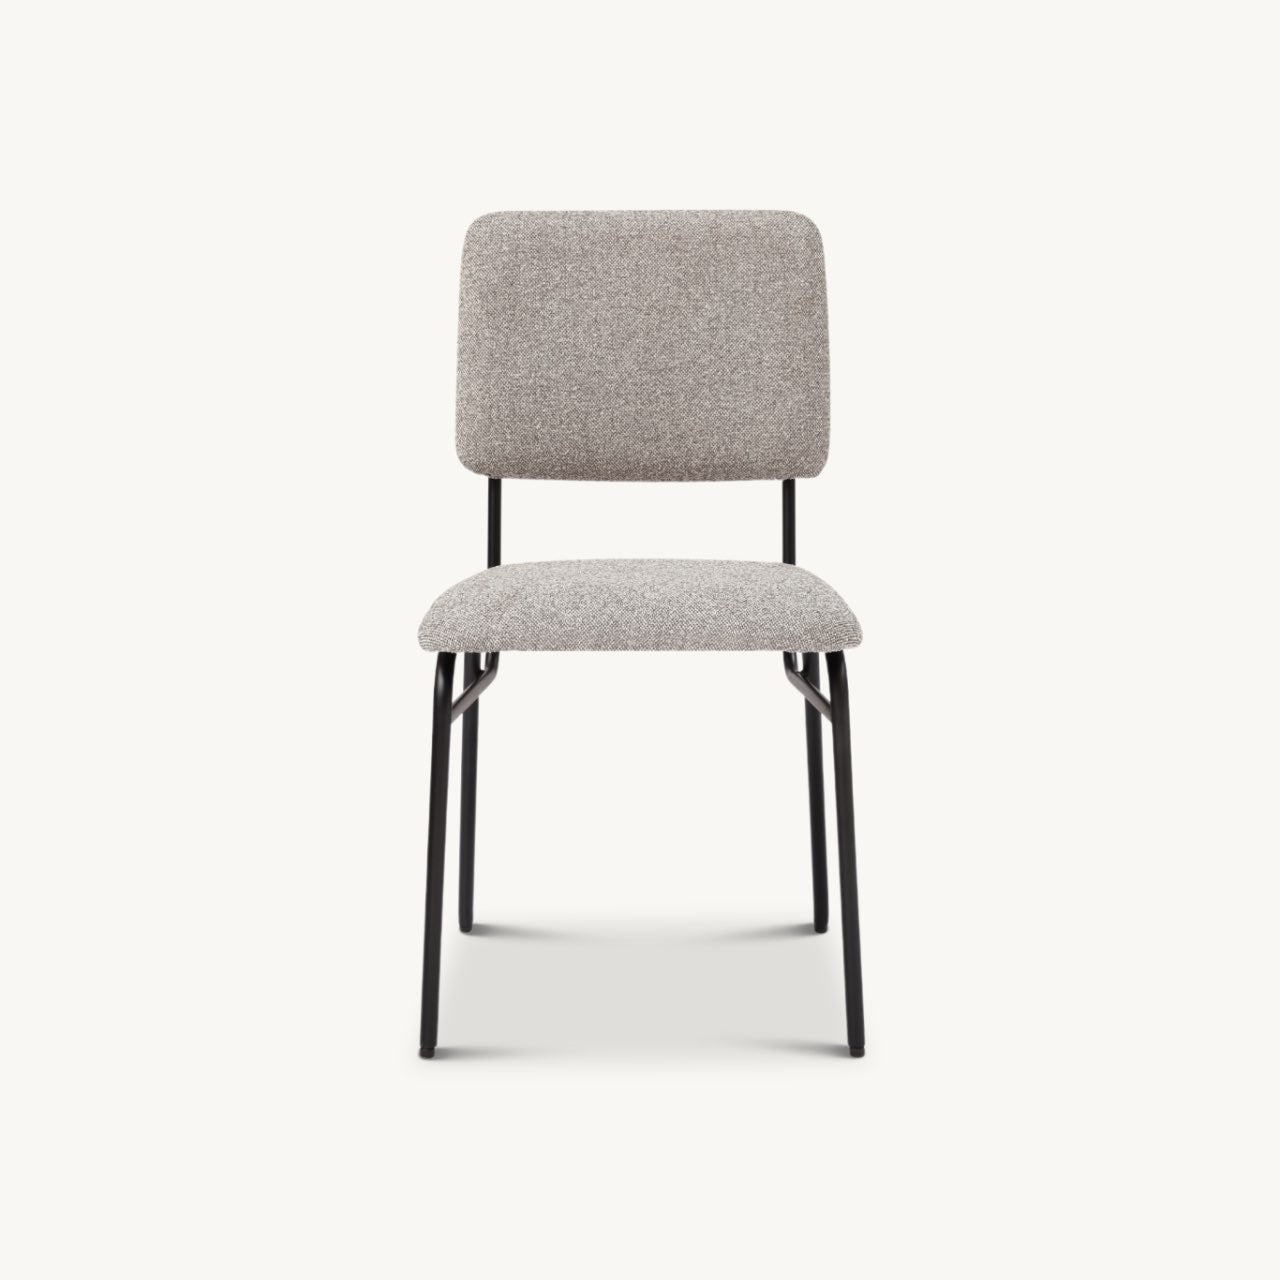 padded industrial style dining chair